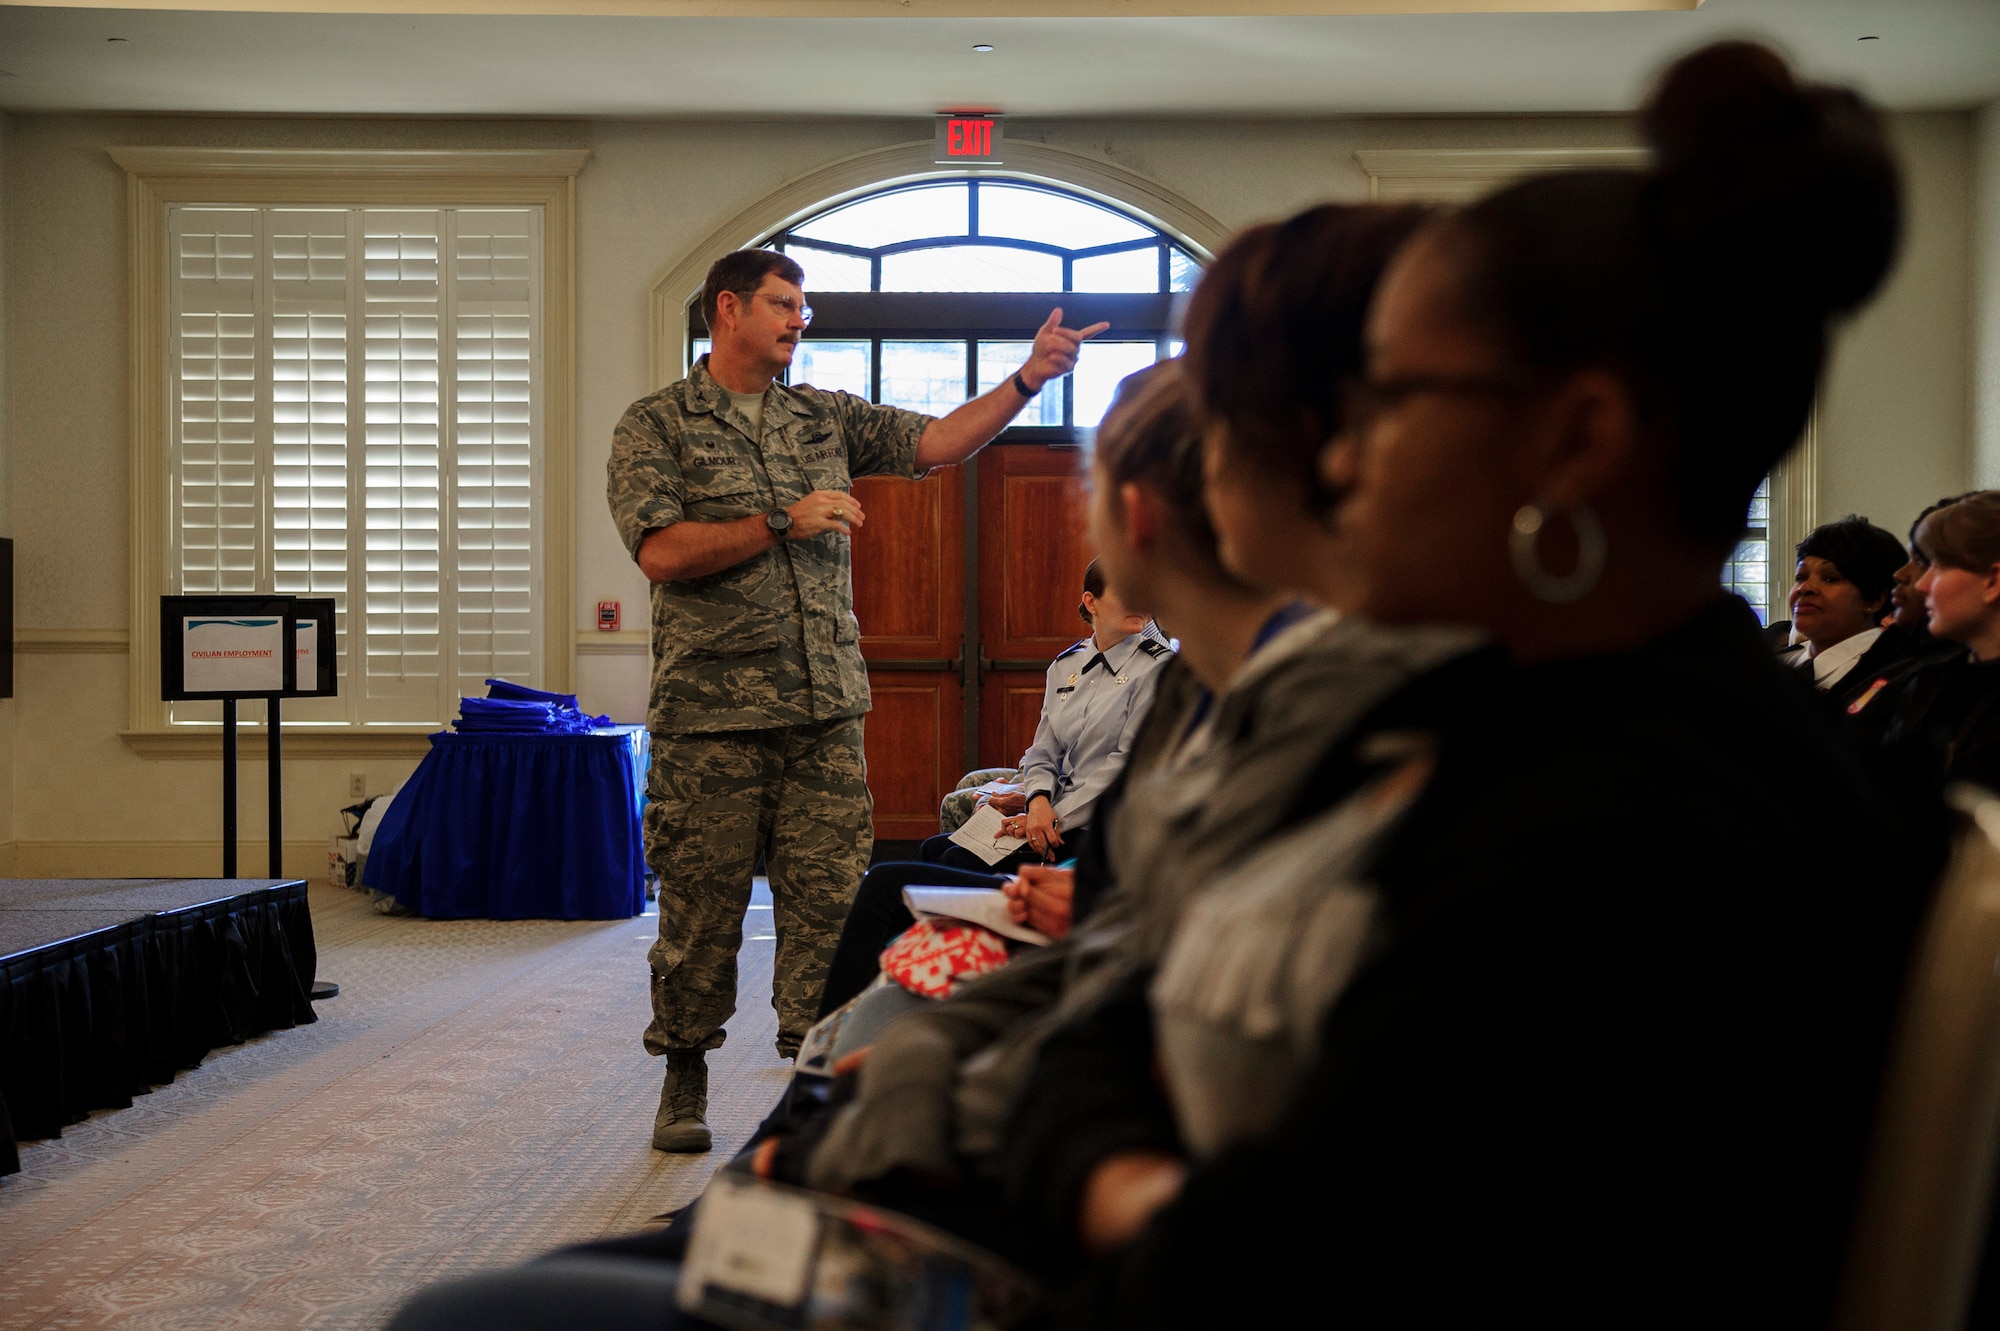 Col. Gregory Gilmour, 315th Airlift Wing commander, welcomes Lowcountry school girls to the 9th Annual Women in Aviation Career Day. Over 130 middle and high school girls from 12 Lowcountry schools visited Joint Base Charleston March 22 to learn about jobs in aviation as part of the 315th Airlift Wing event.	(U.S. Air Force photo by Senior Airman Jonathan Lane)